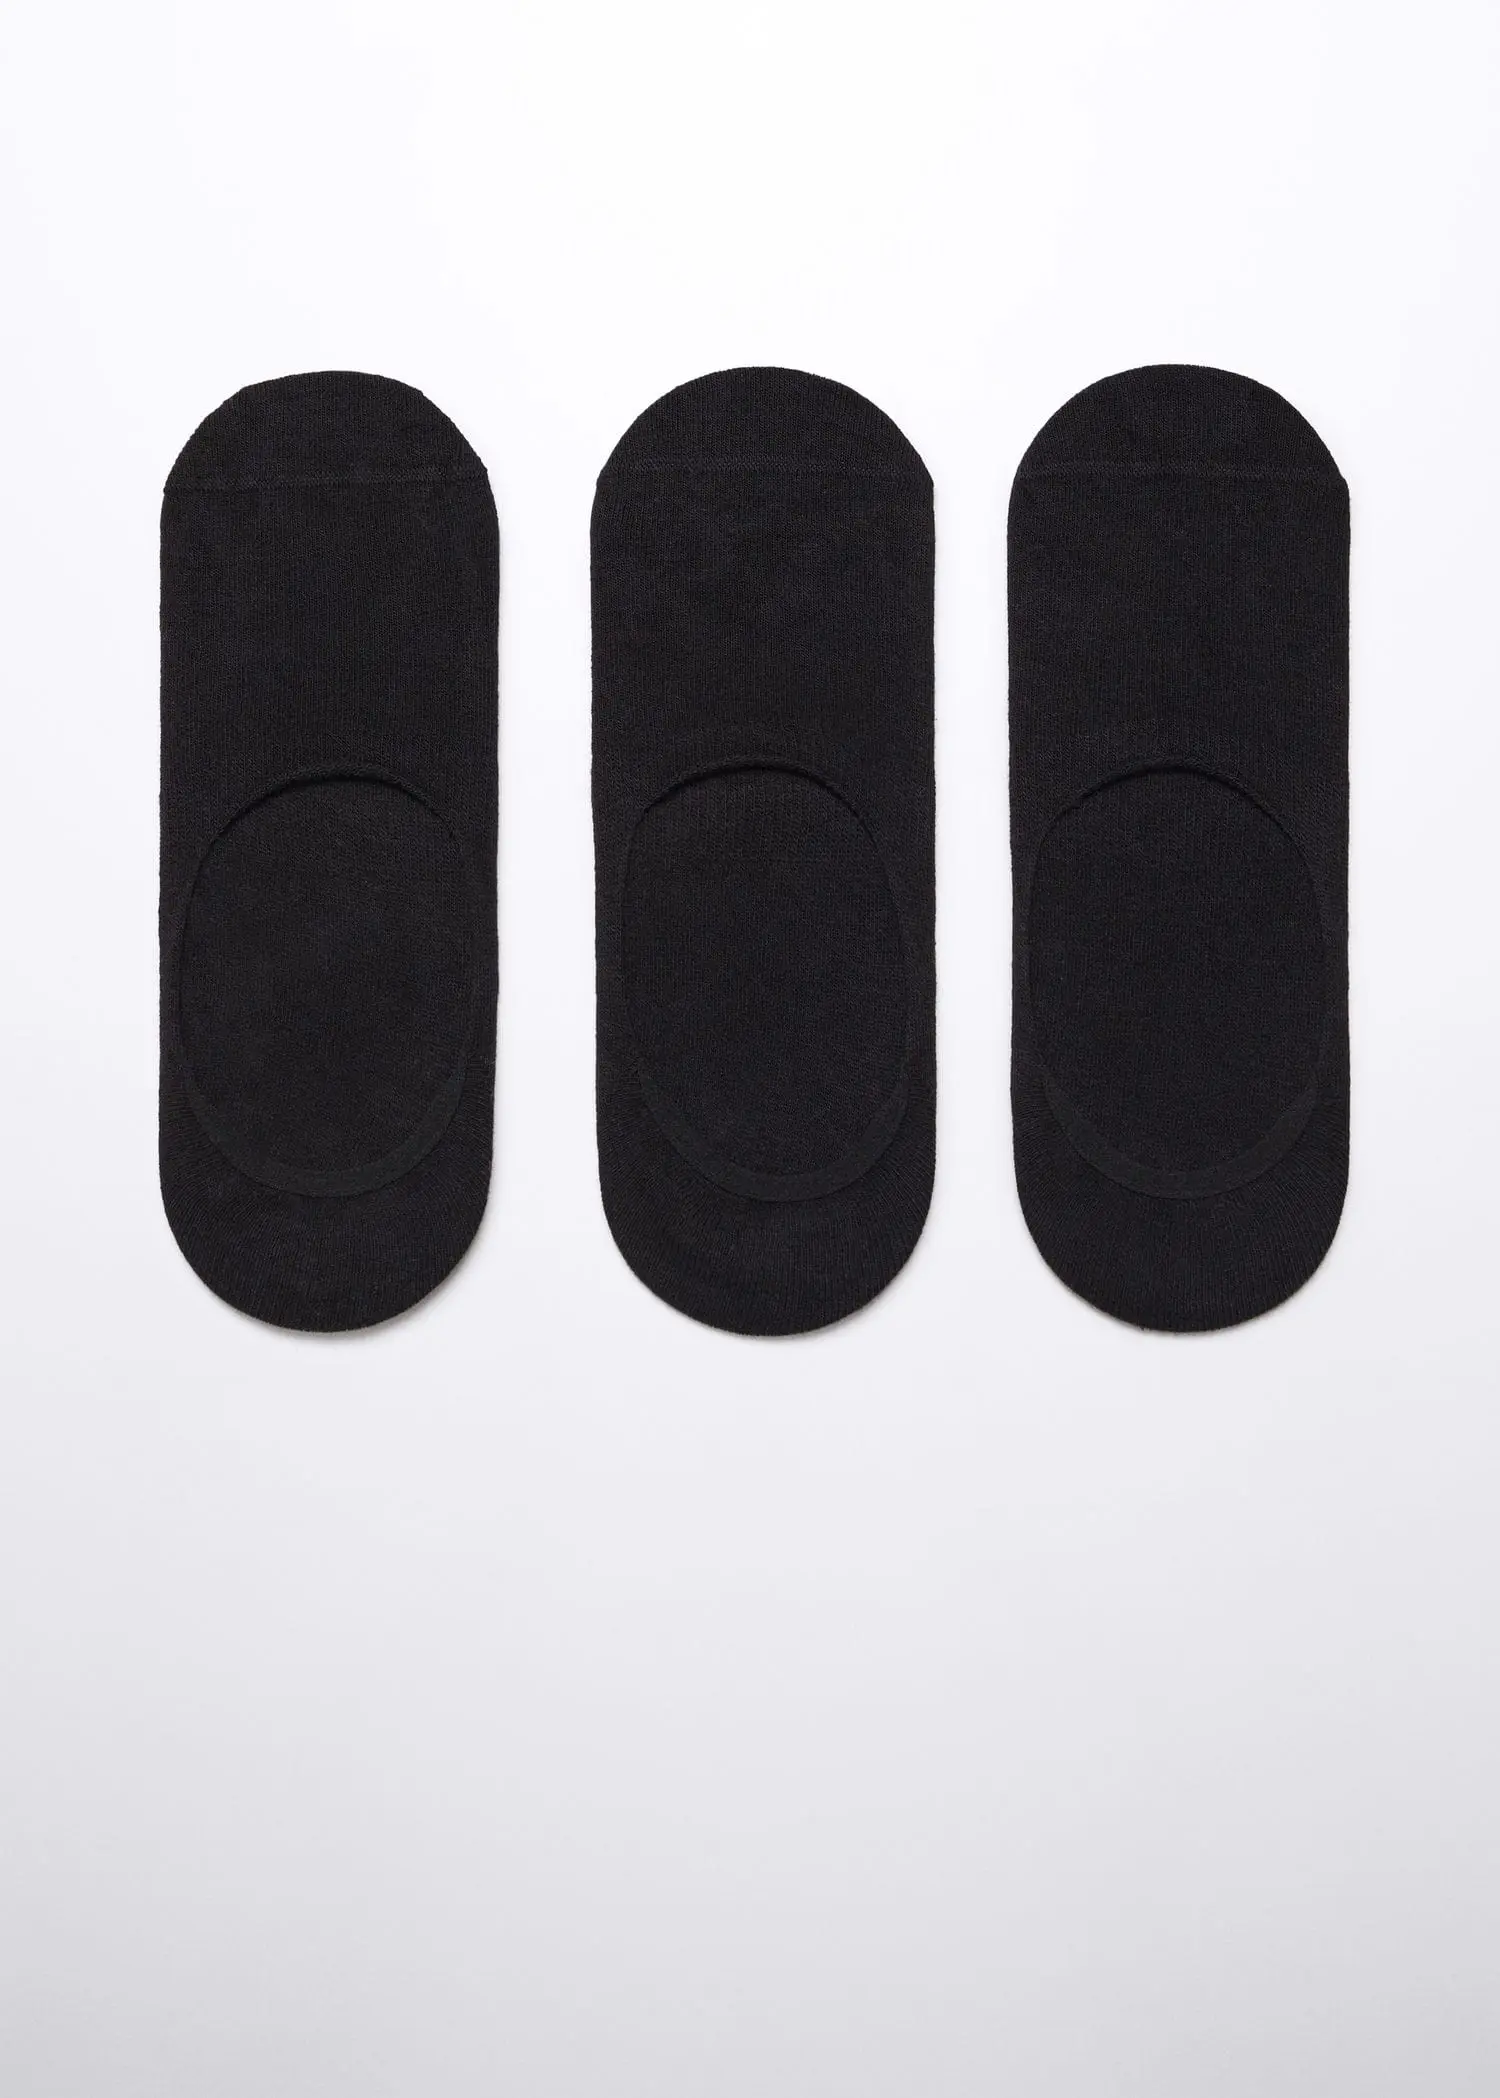 Mango 3-pack of invisible socks. three pairs of black socks on top of a white surface. 